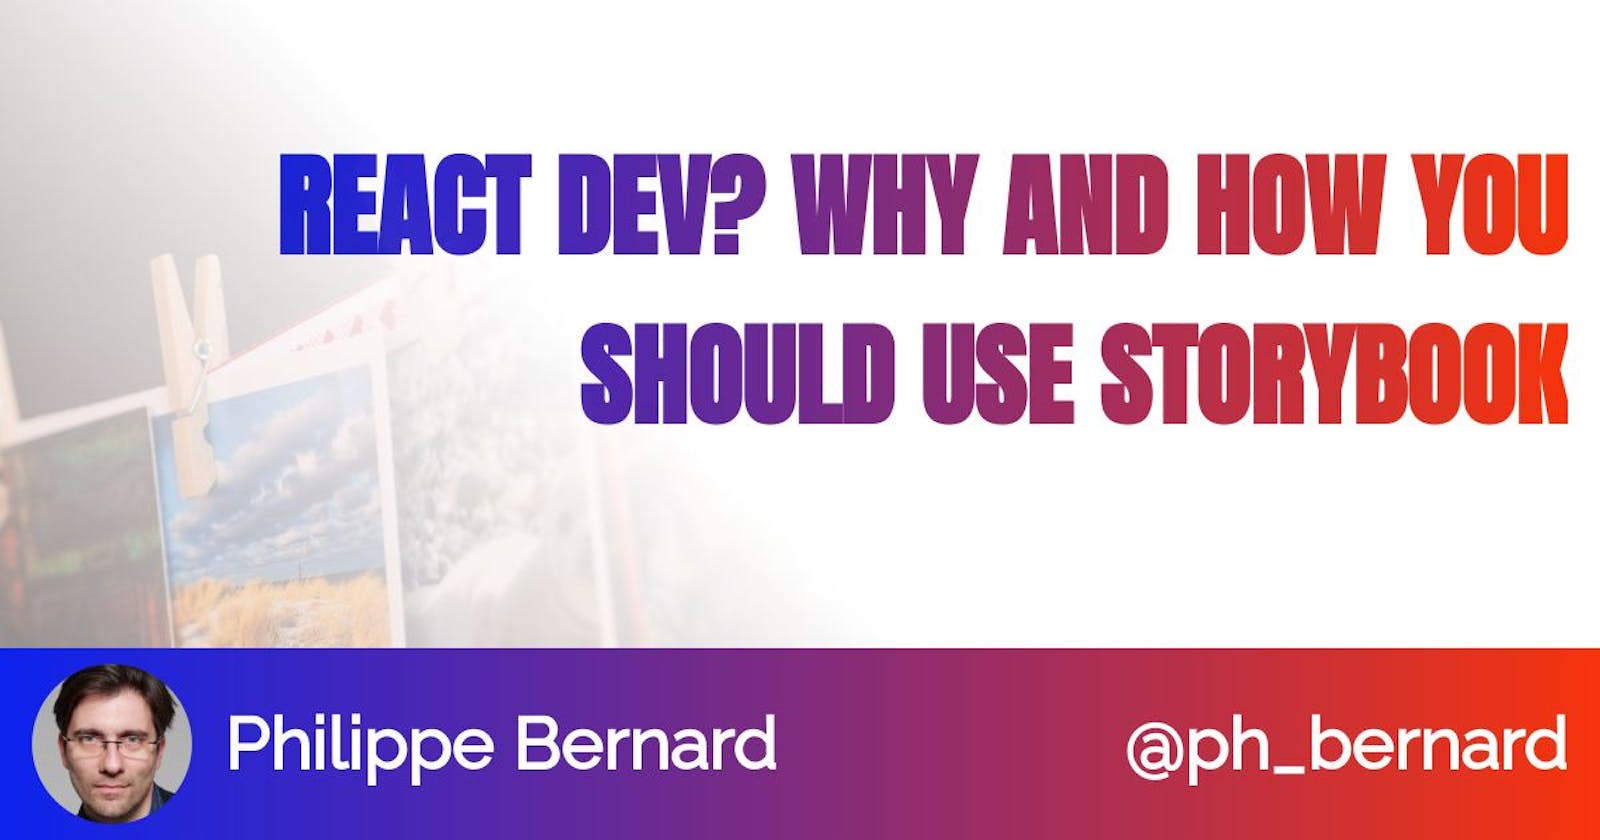 React dev? Why and how you should use Storybook